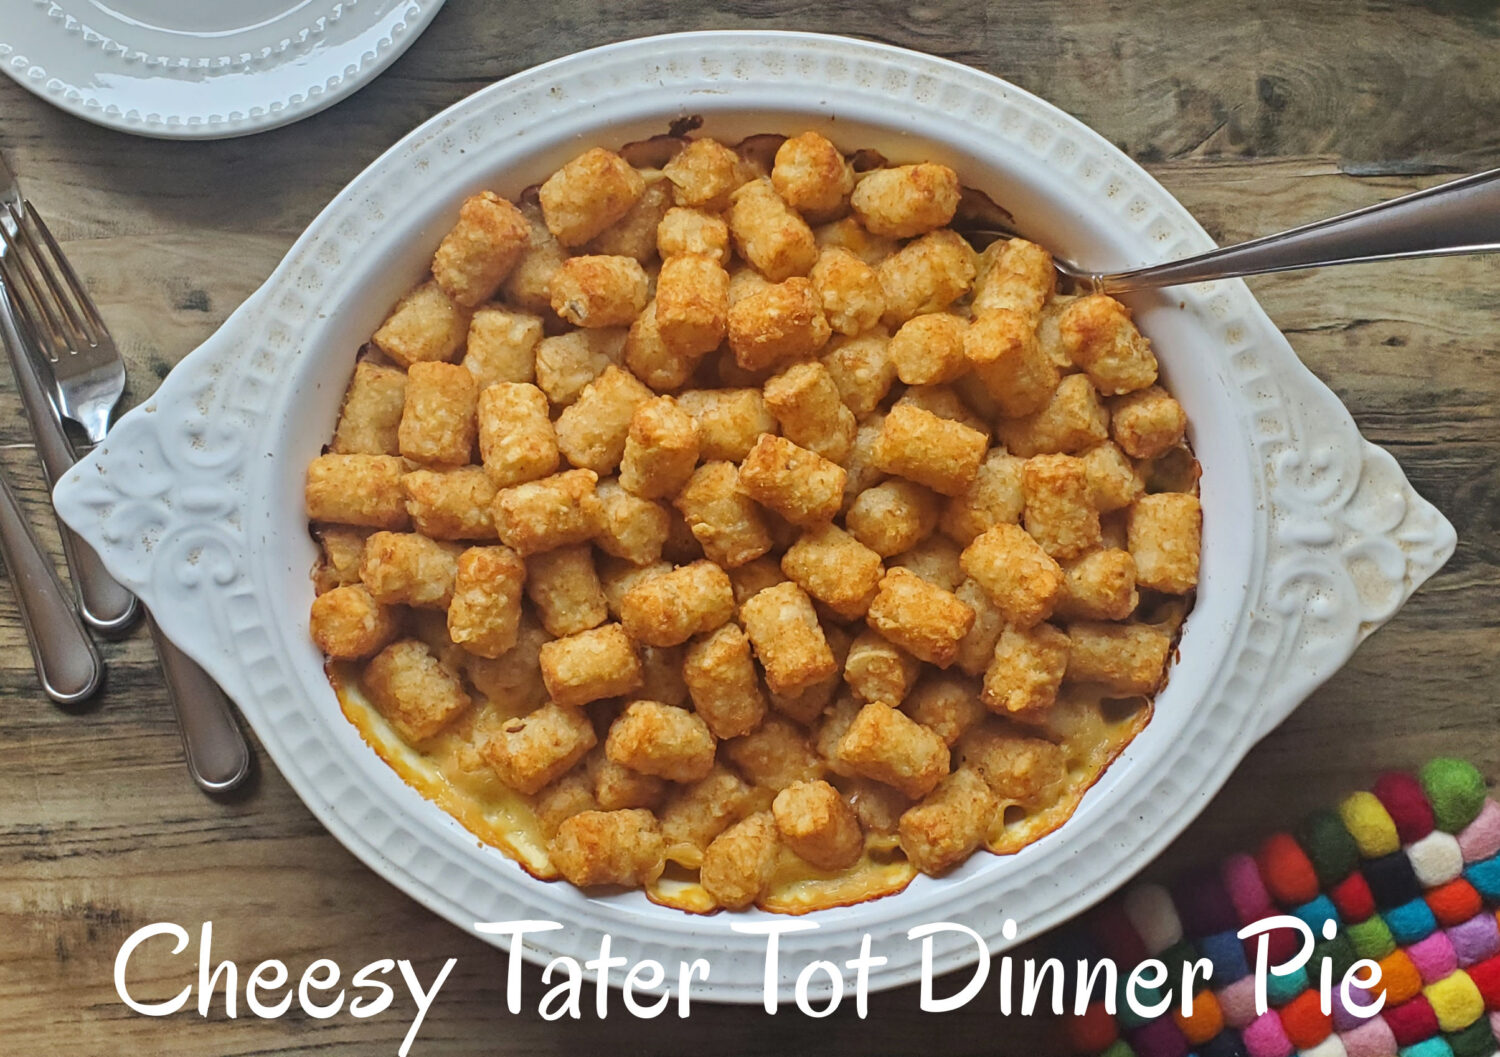 Cheesy Tater Tot Dinner Pie: Ground beef or turkey and veggies baked in a cheese bechamel sauce and topped with crispy Tater Tots!